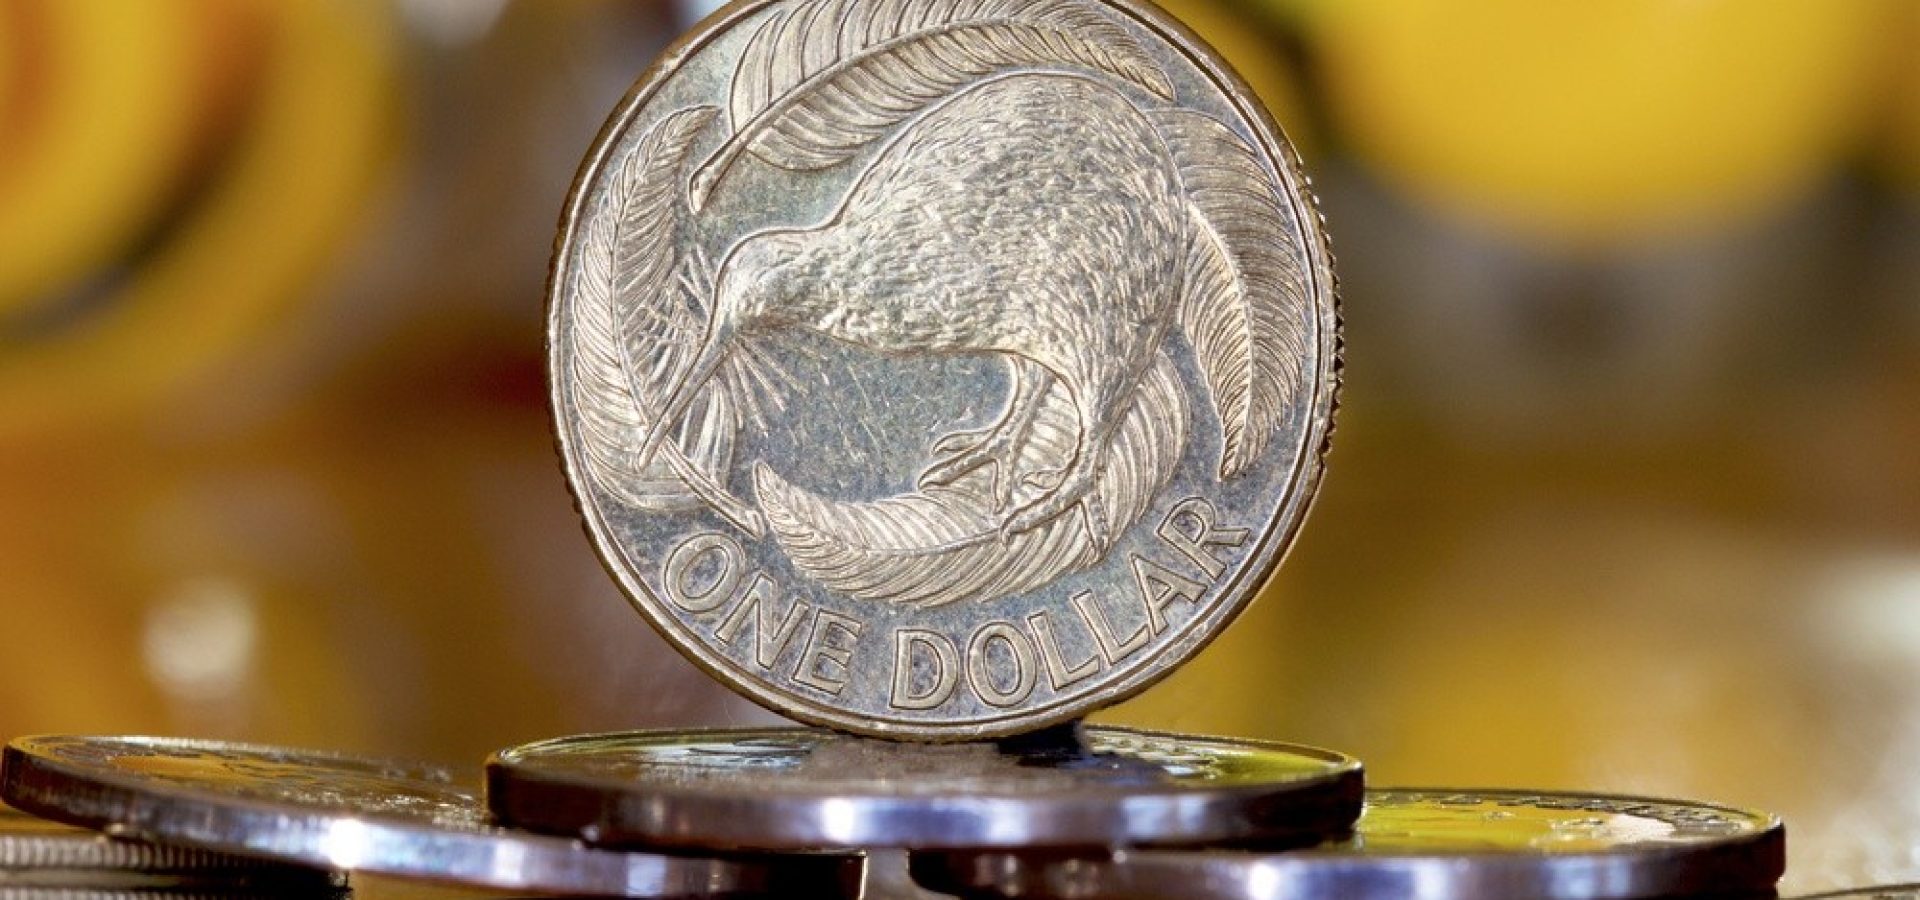 Wibest – NZD USD: A close up of a New Zealand dollar coin.